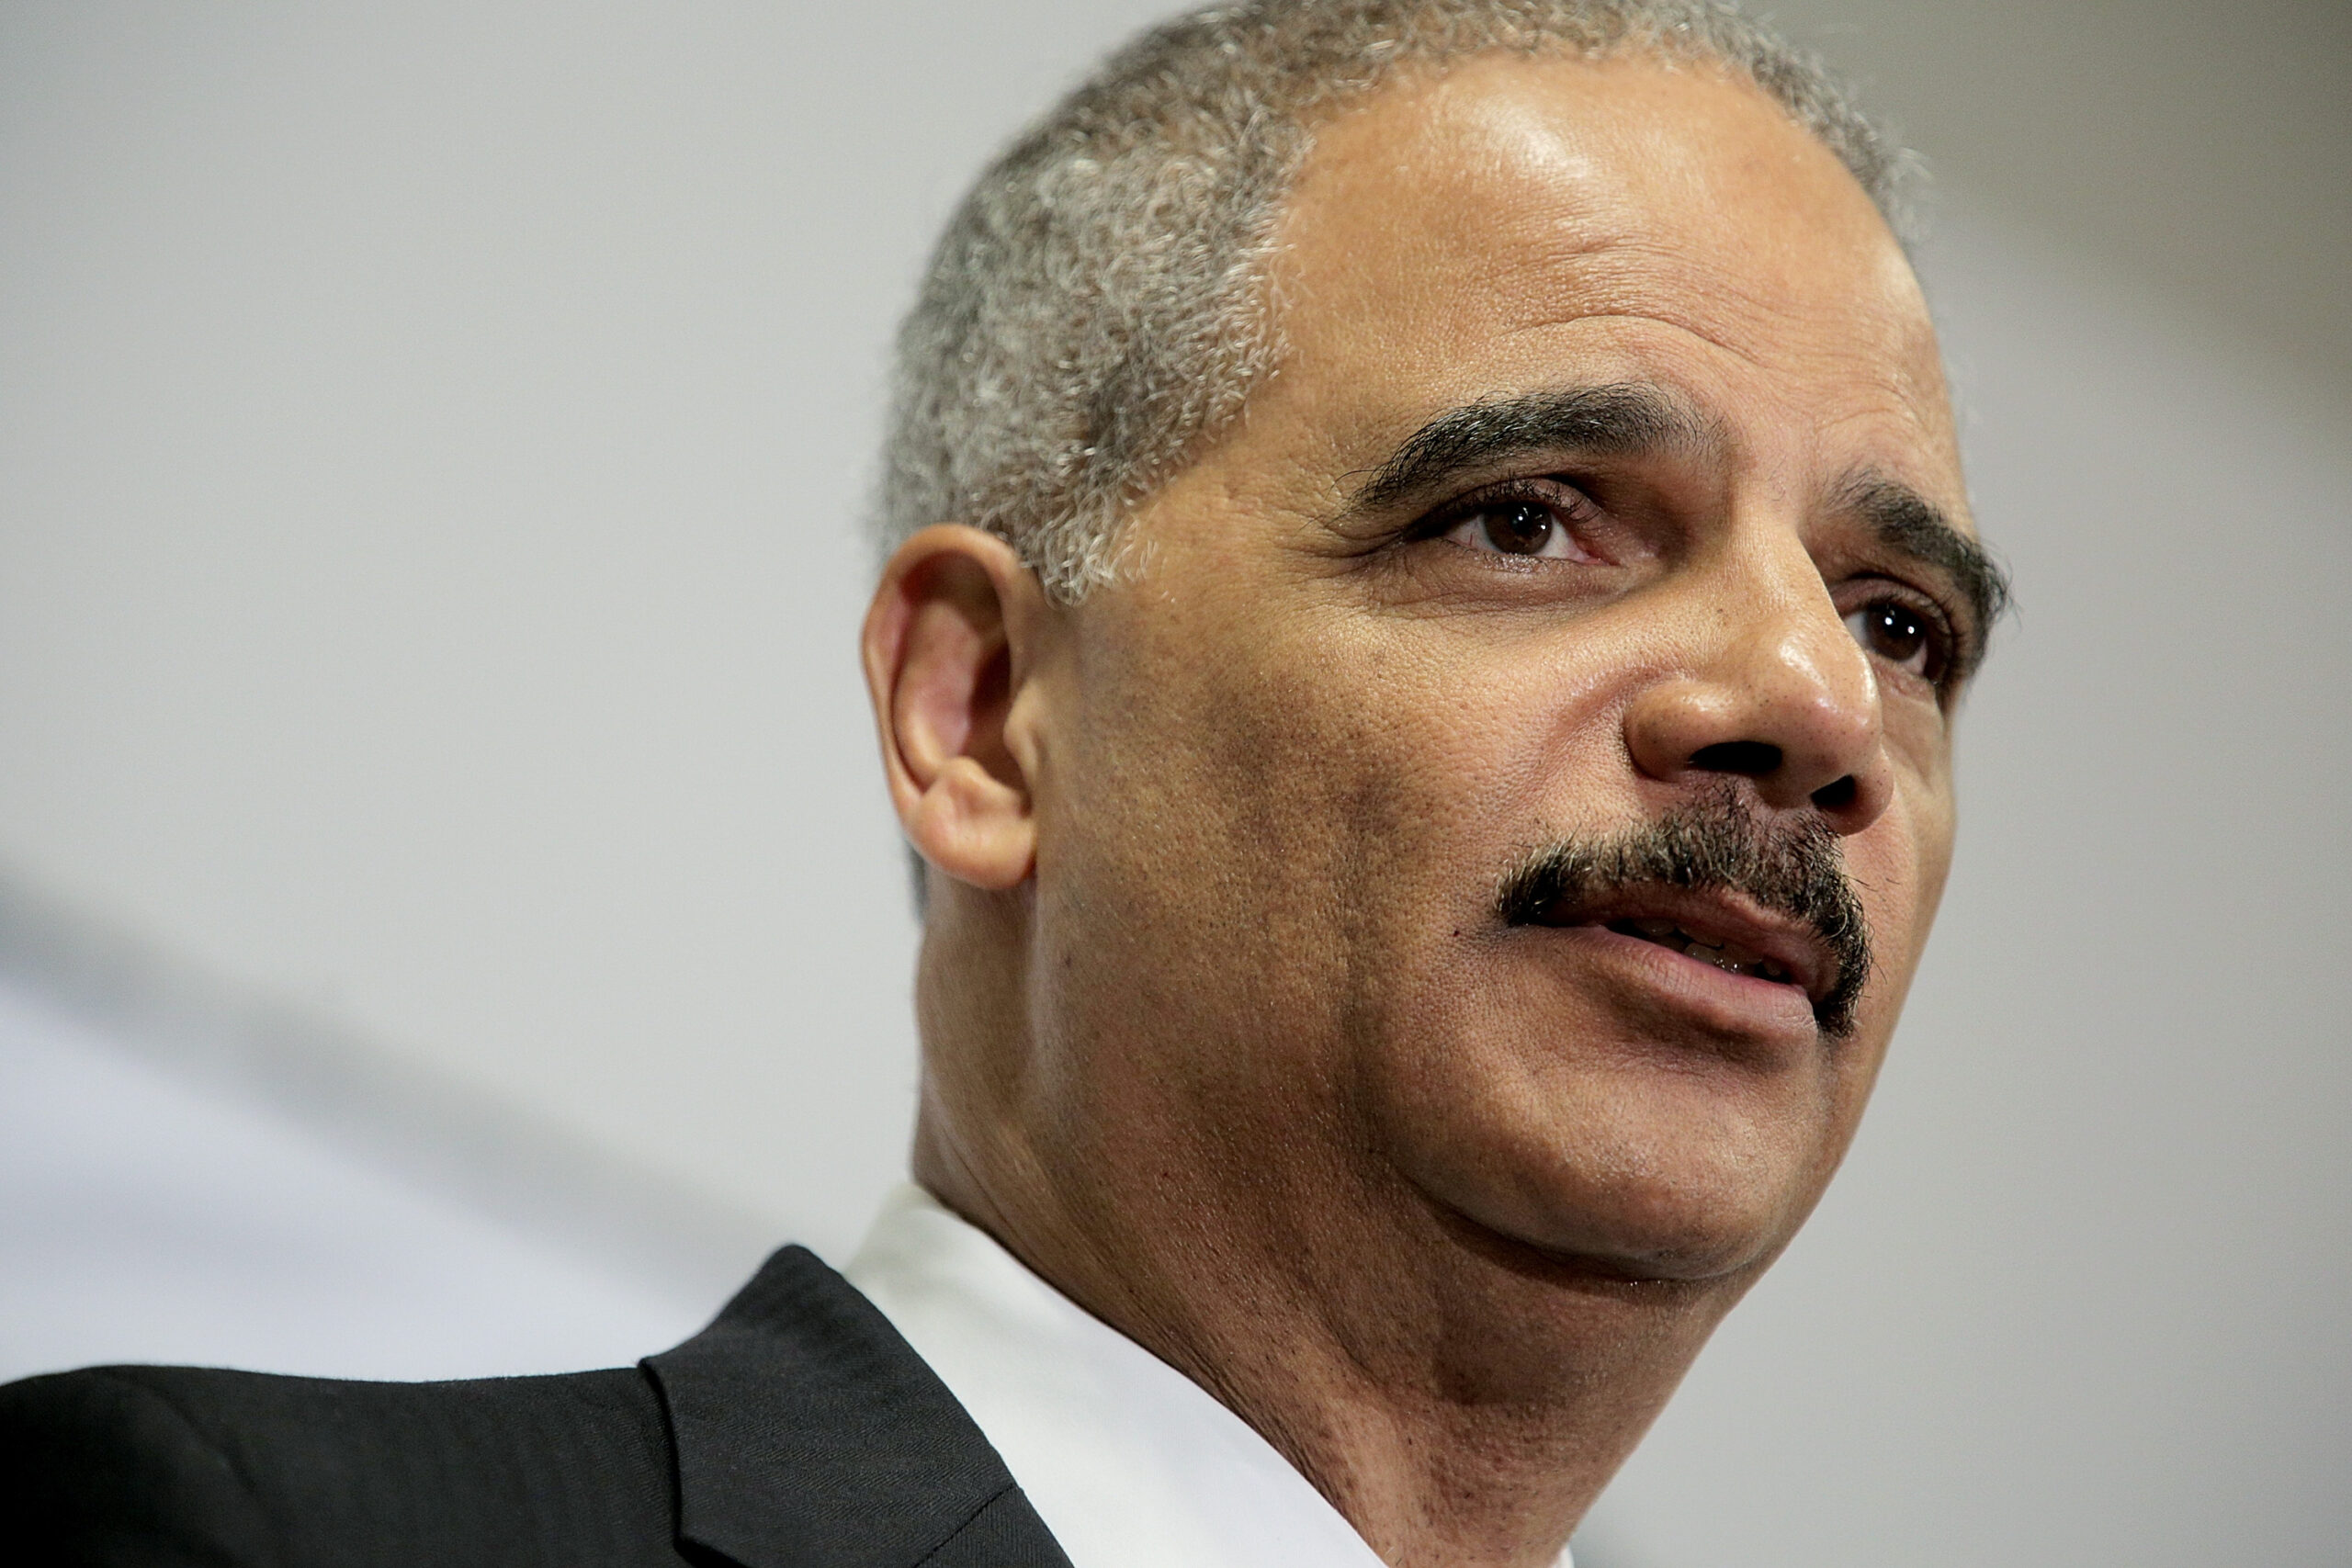 Eric Holder’s Racial Justice Legacy